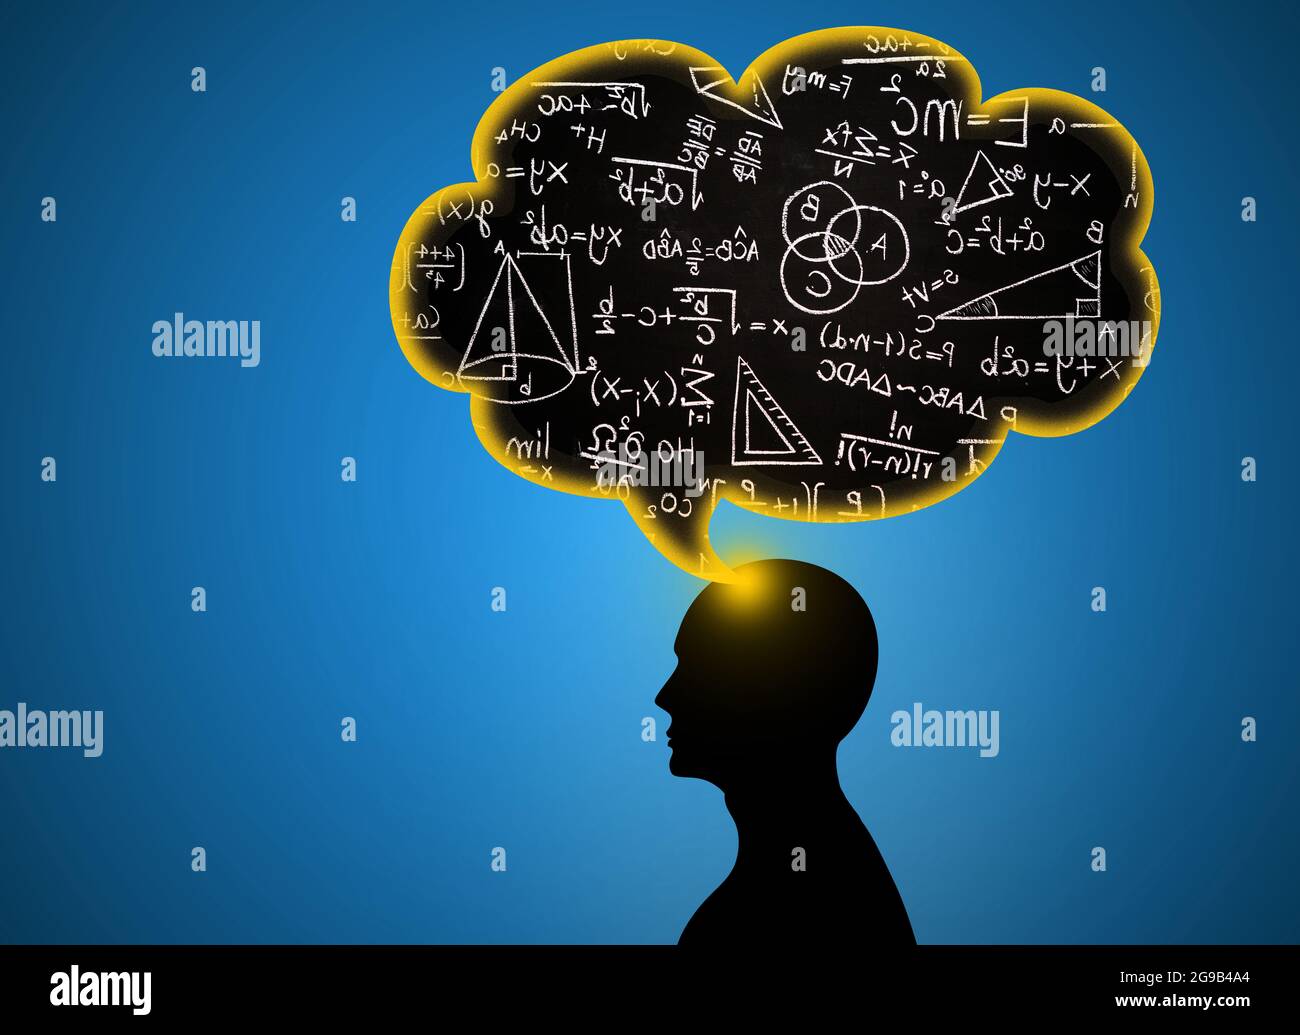 Man Head With Bubble Thoughts of Maths and physics formulas. Man Silhouette Brain With mathematics and physic Formula . scientific brainstorming Stock Photo